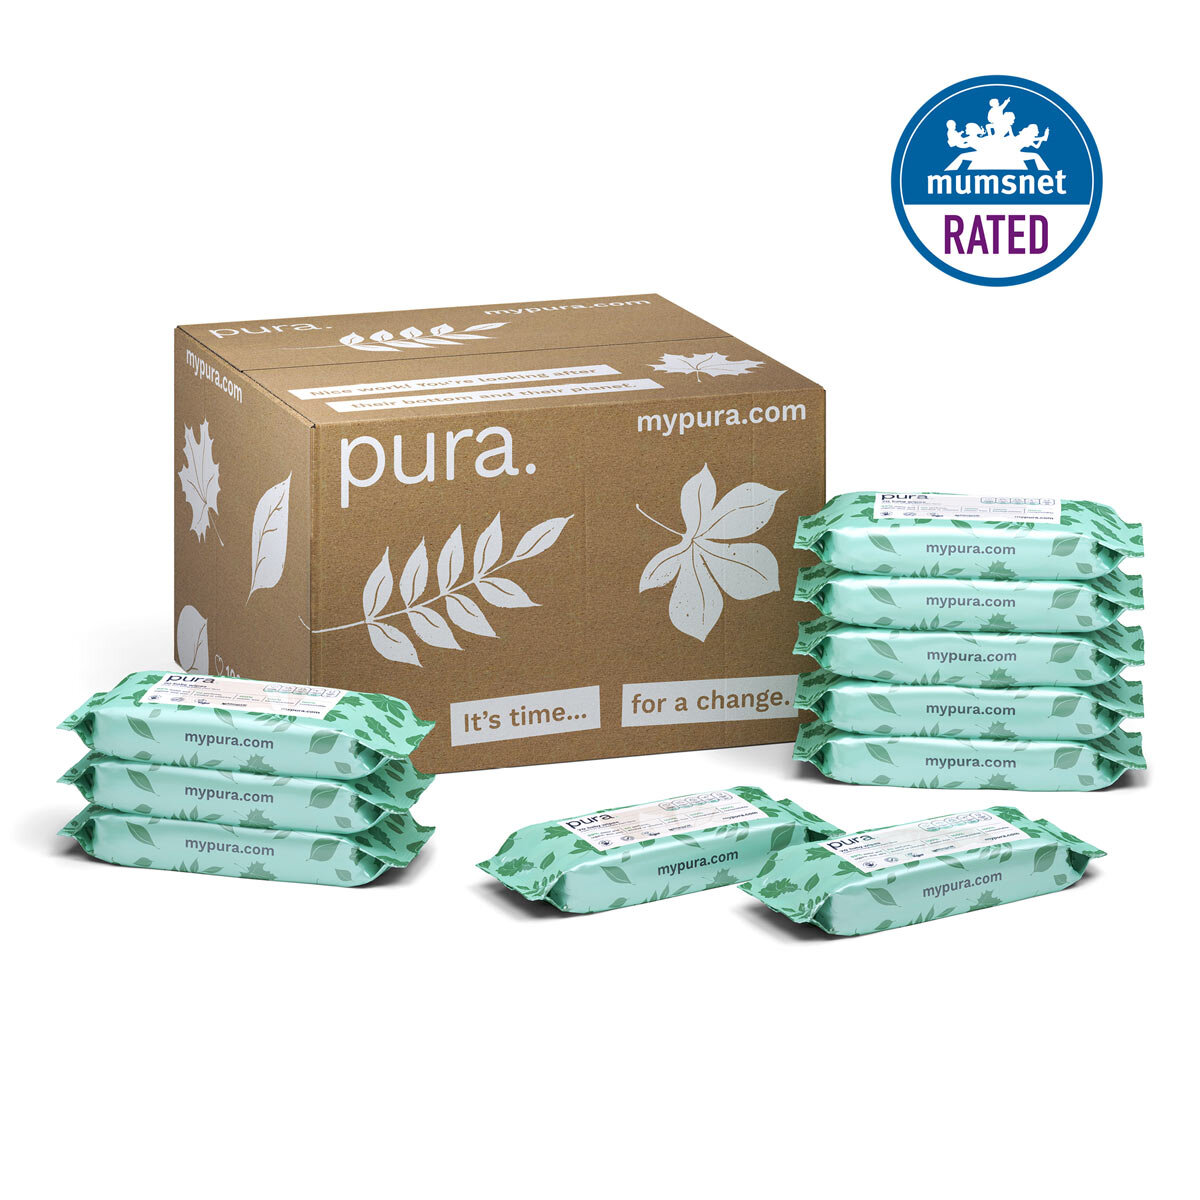 Pura 100% Plastic Free, Biodegradable Baby Wipes, 10 x 70 Pack (700 Total)